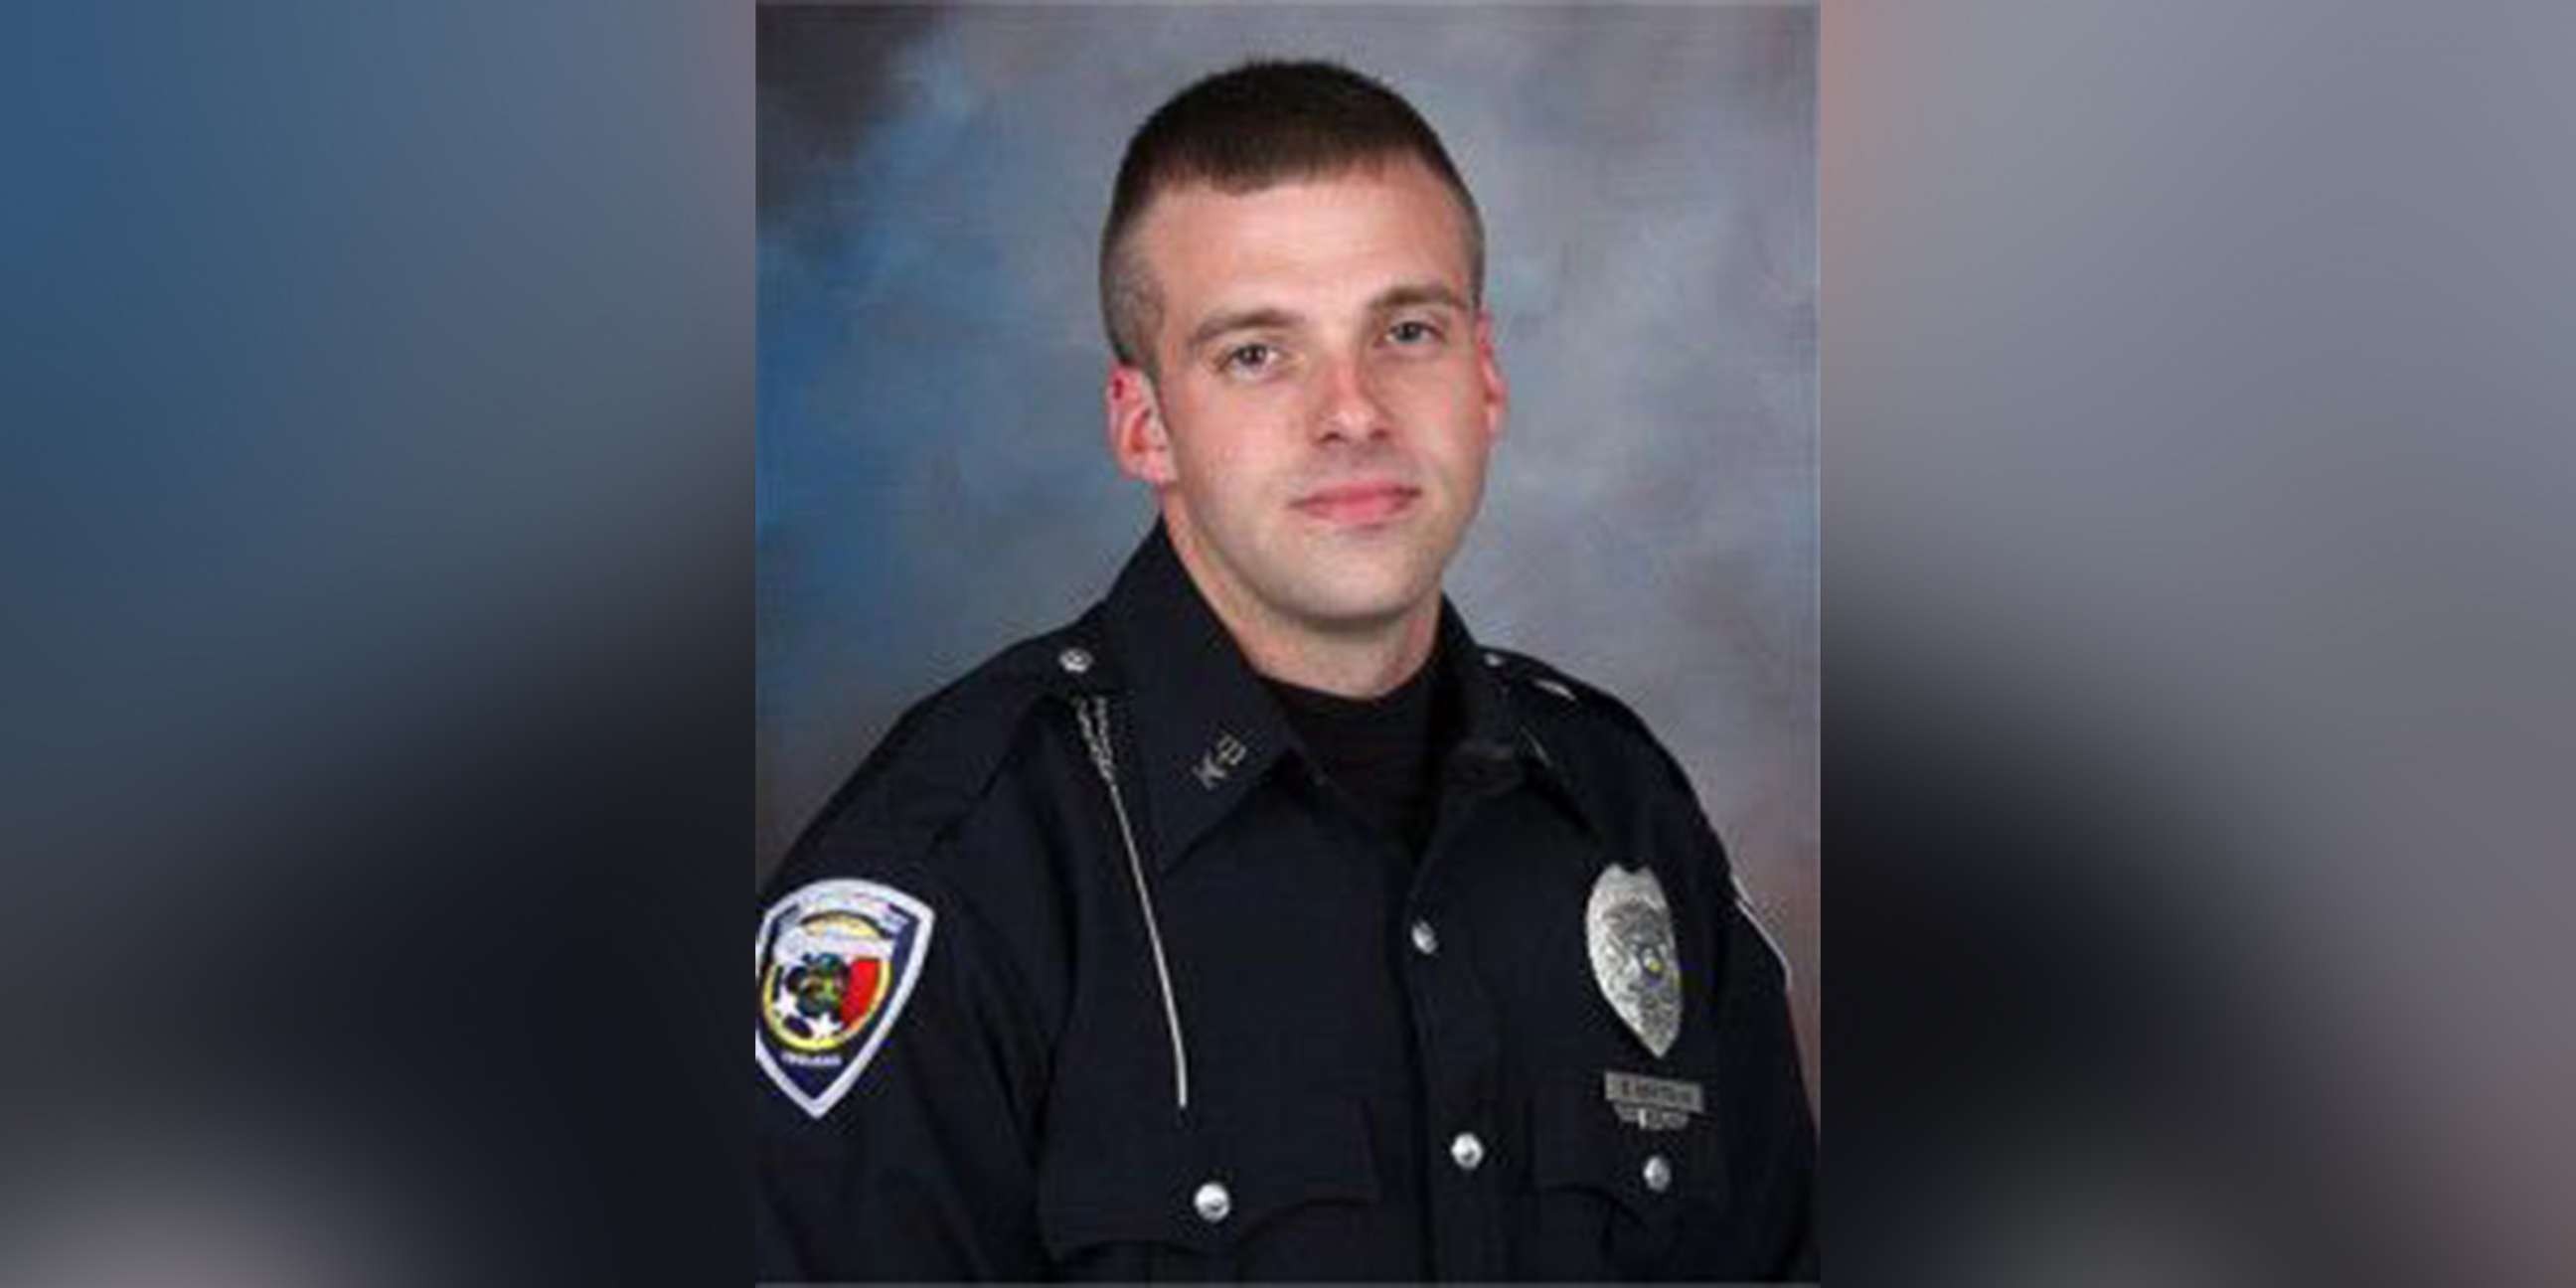 PHOTO: Authorities say that Sgt. Benton Bertram of the Charlestown Police Department died at the scene of a crash when he lost control of his vehicle and hit a tree during a high-speed chase in Scott County, Ind., Dec. 12, 2018.